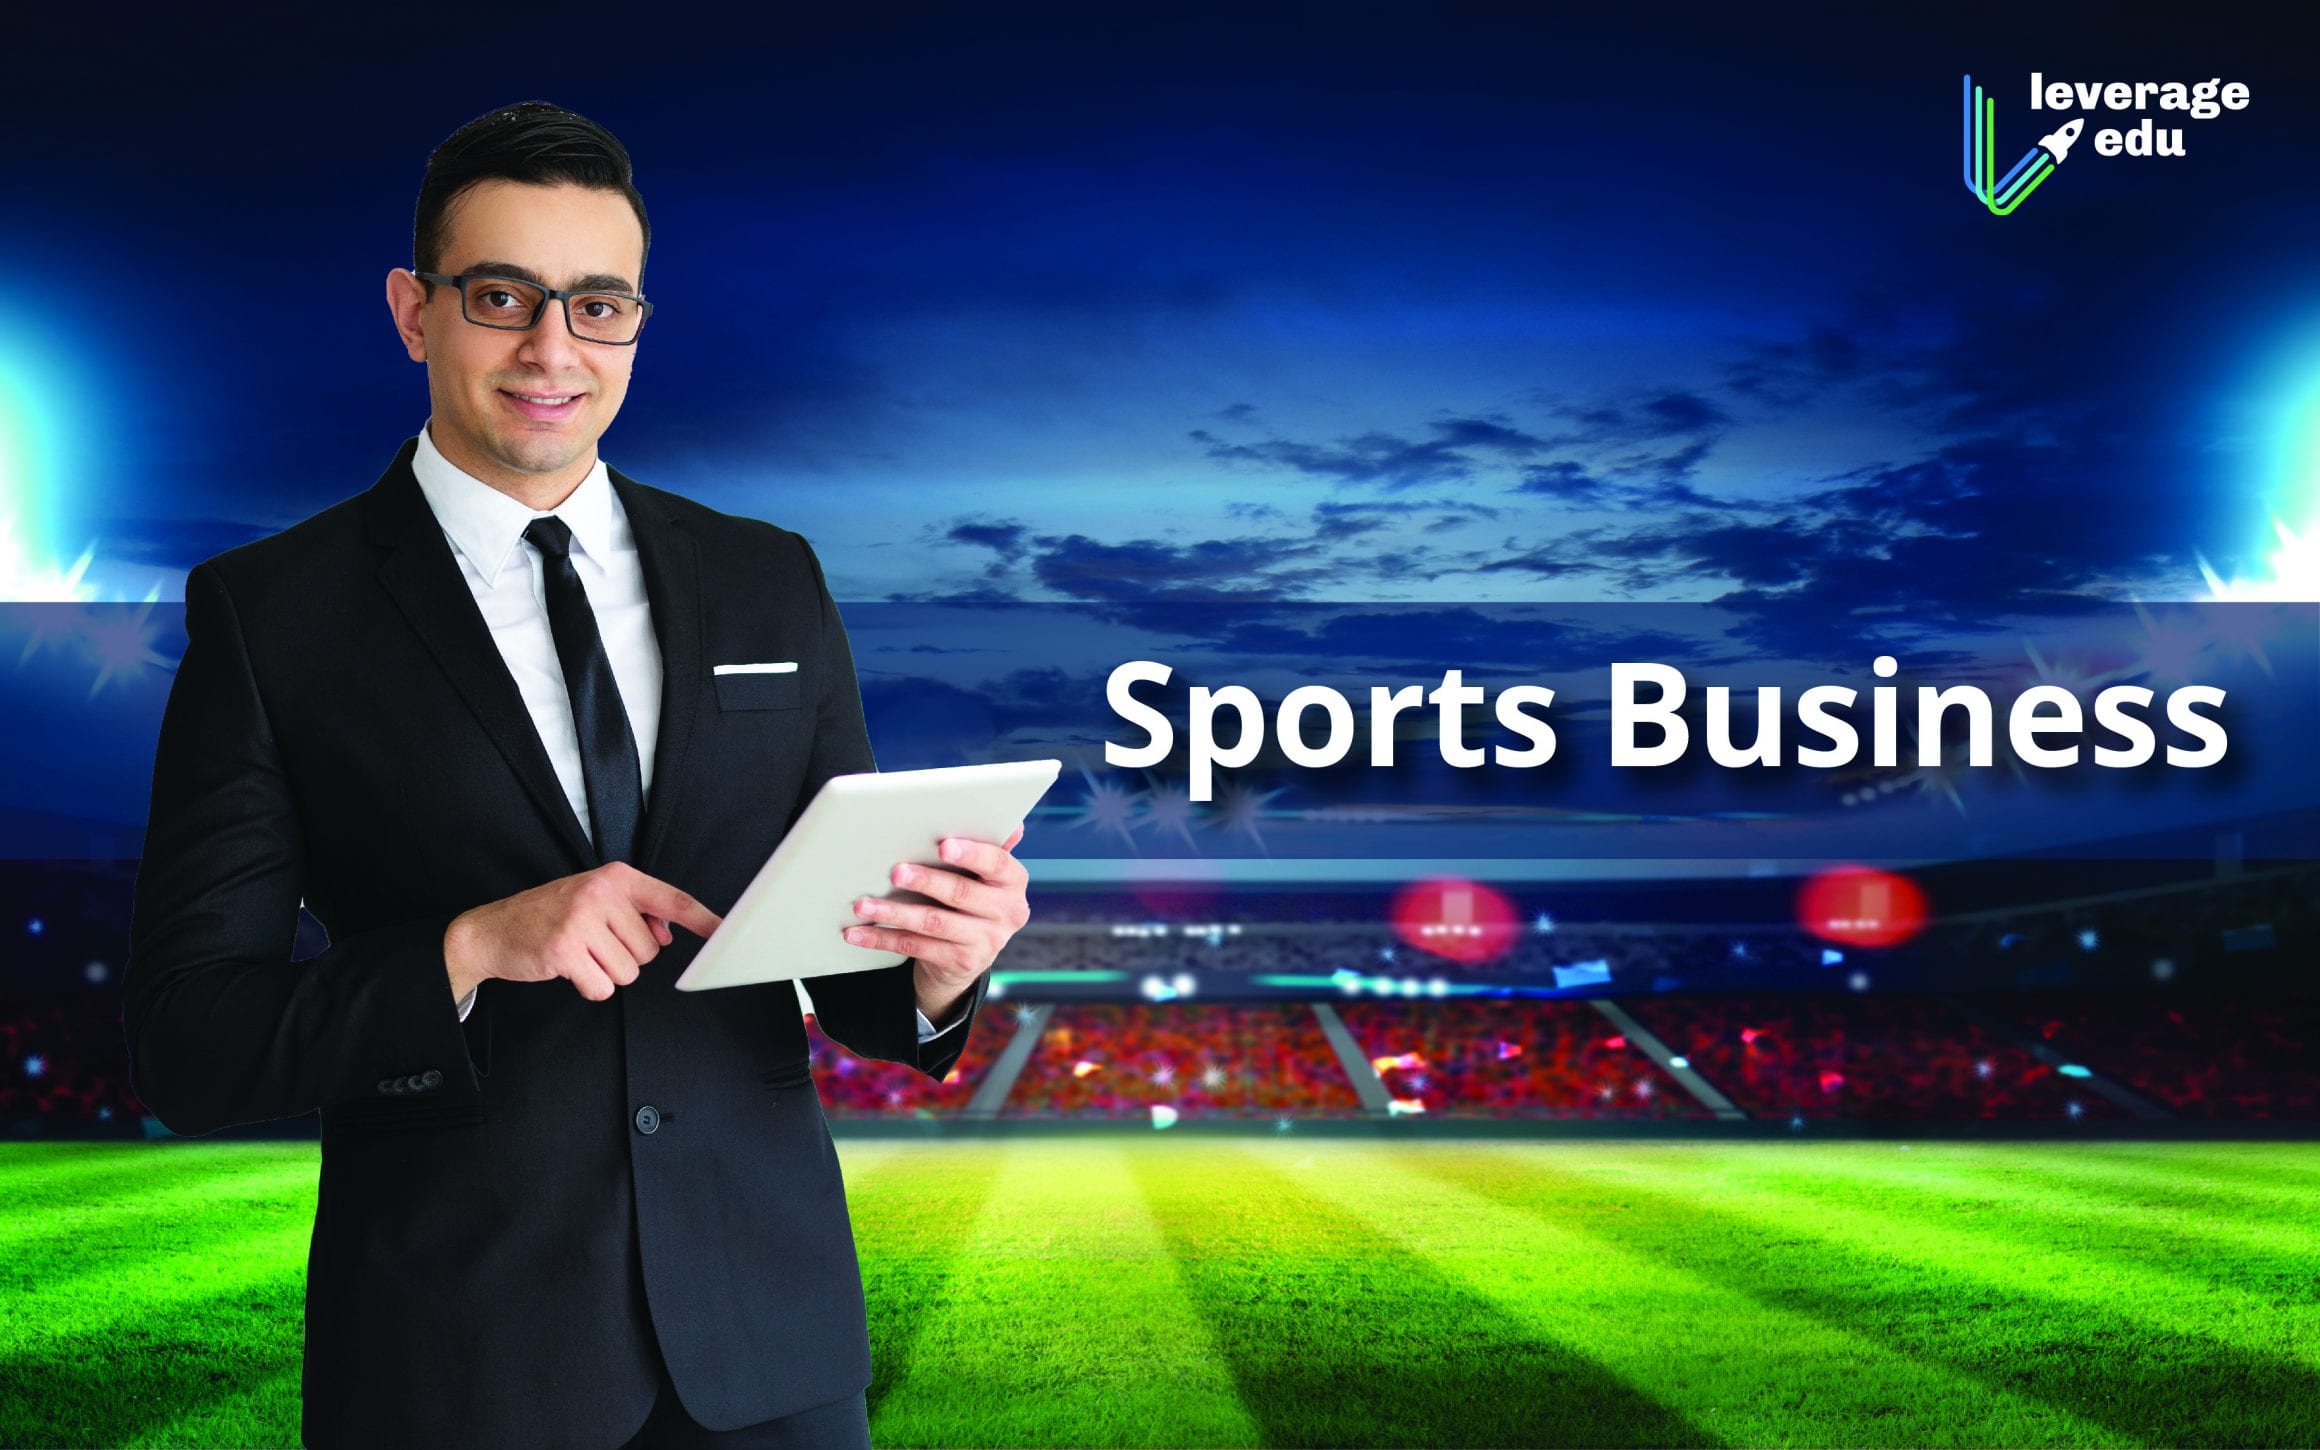 What is Sports Business? Jobs, Careers, Courses 2020 - Leverage Edu